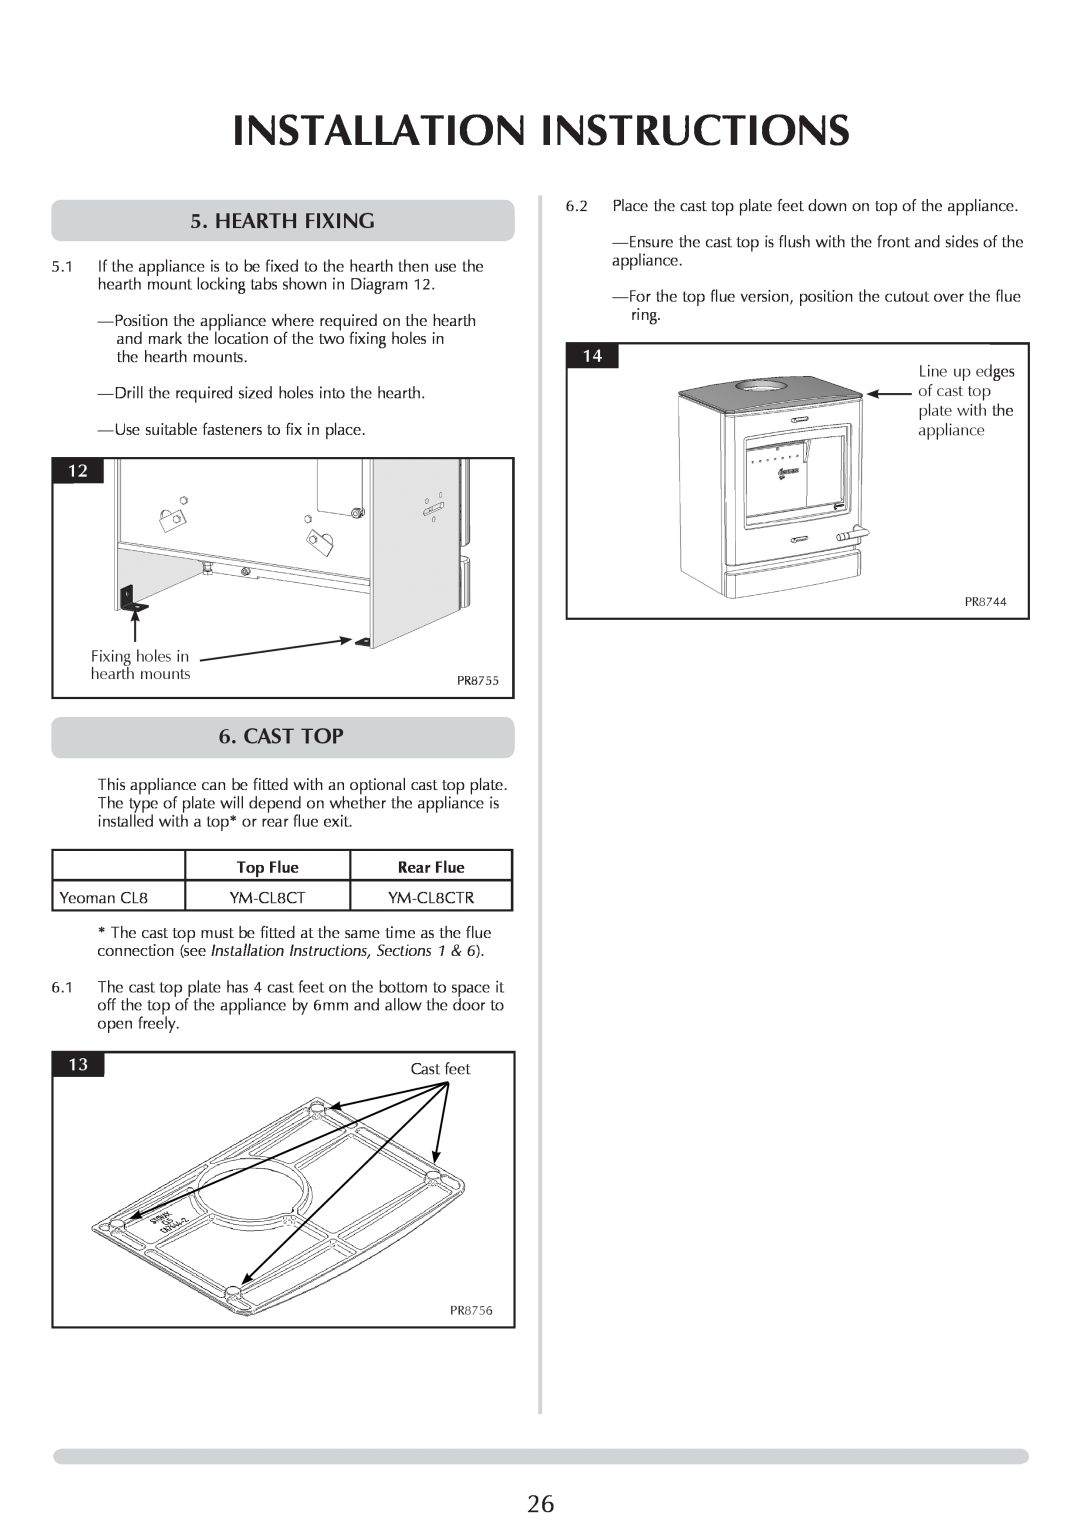 Yeoman YM-CL8HB manual Hearth Fixing, Cast Top, Installation Instructions, Top Flue, Rear Flue 